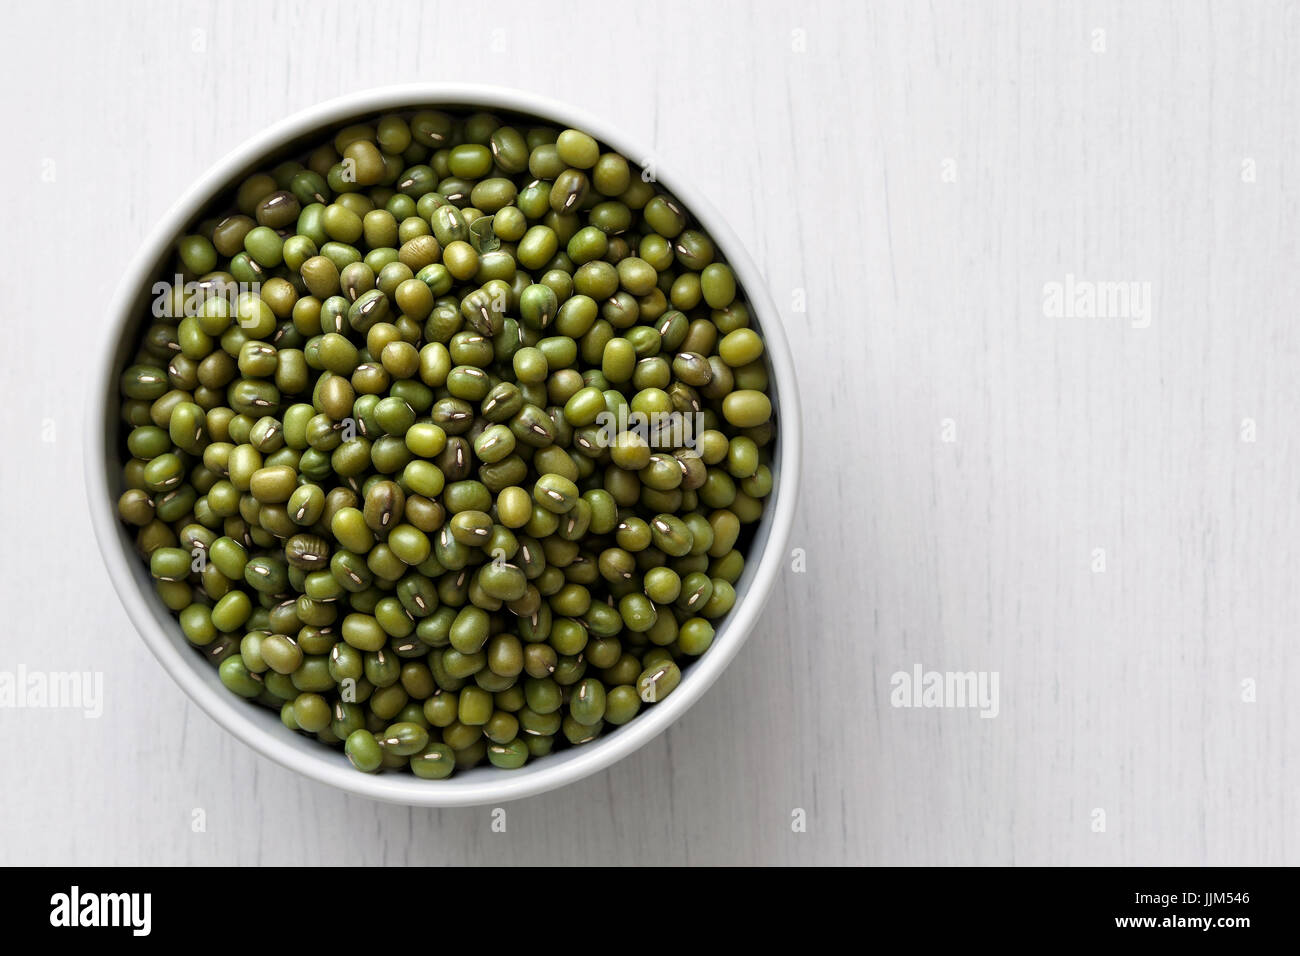 Dry mung beans  in white ceramic bowl isolated on painted white wood from above. Stock Photo